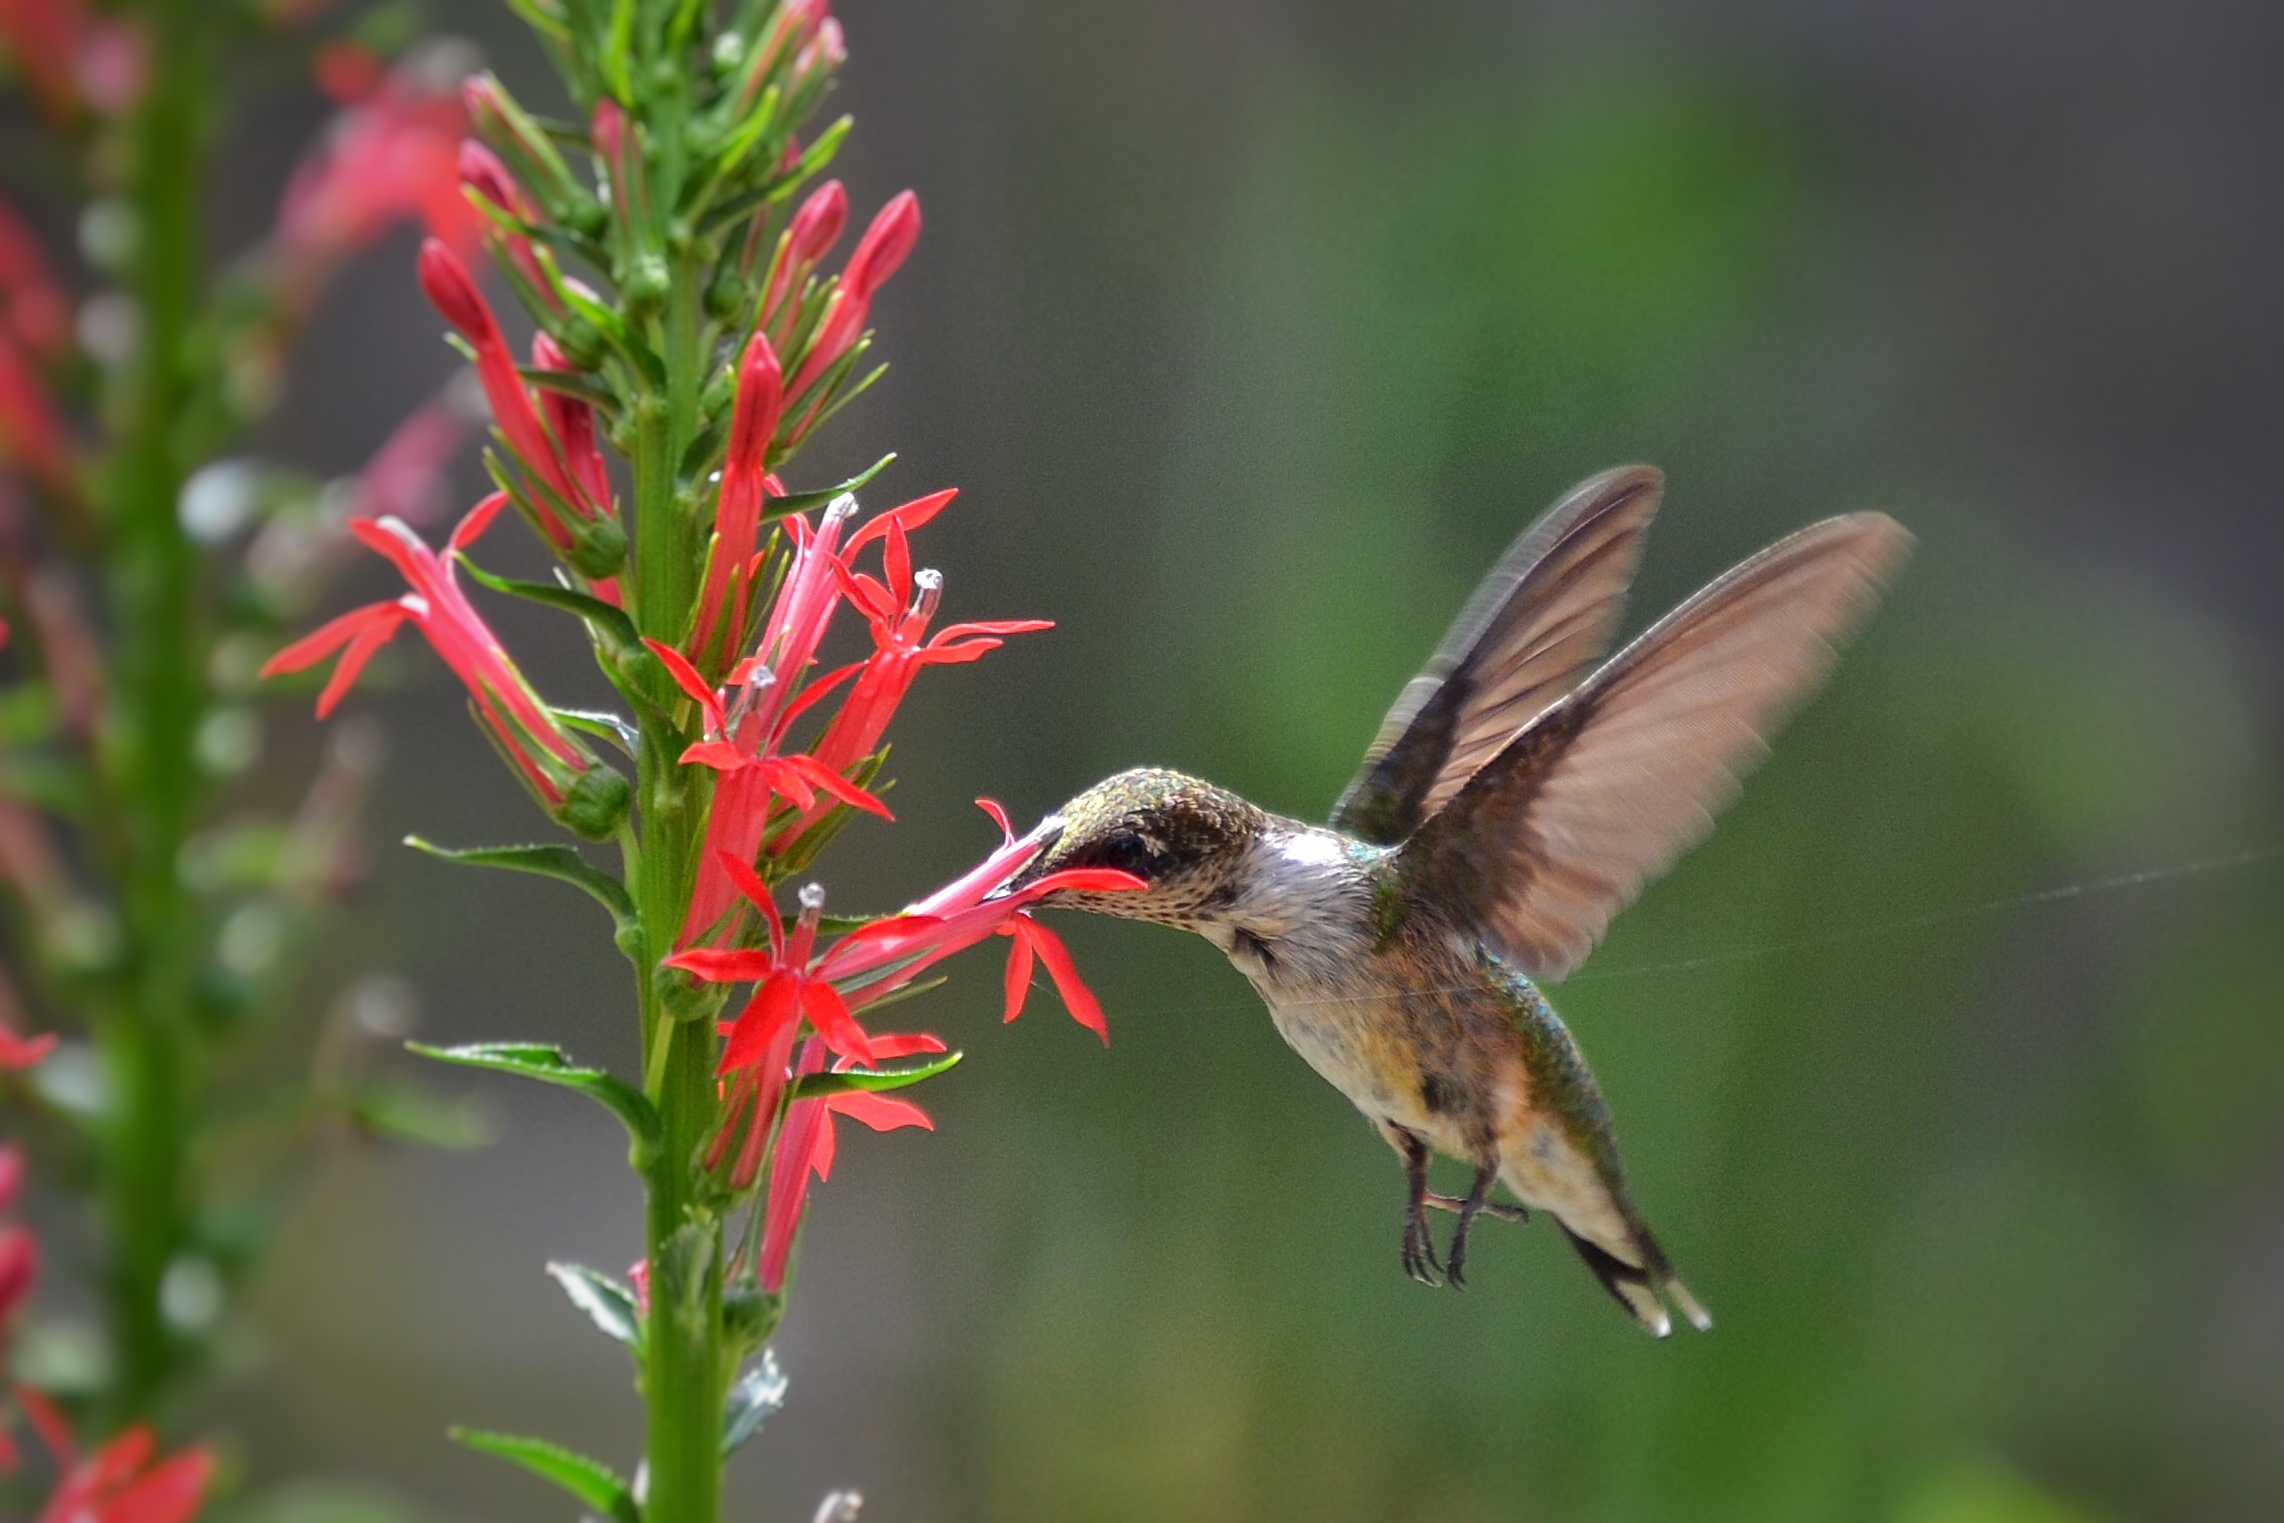 A ruby-throated hummingbird sipping nectar from a cardinal flower.